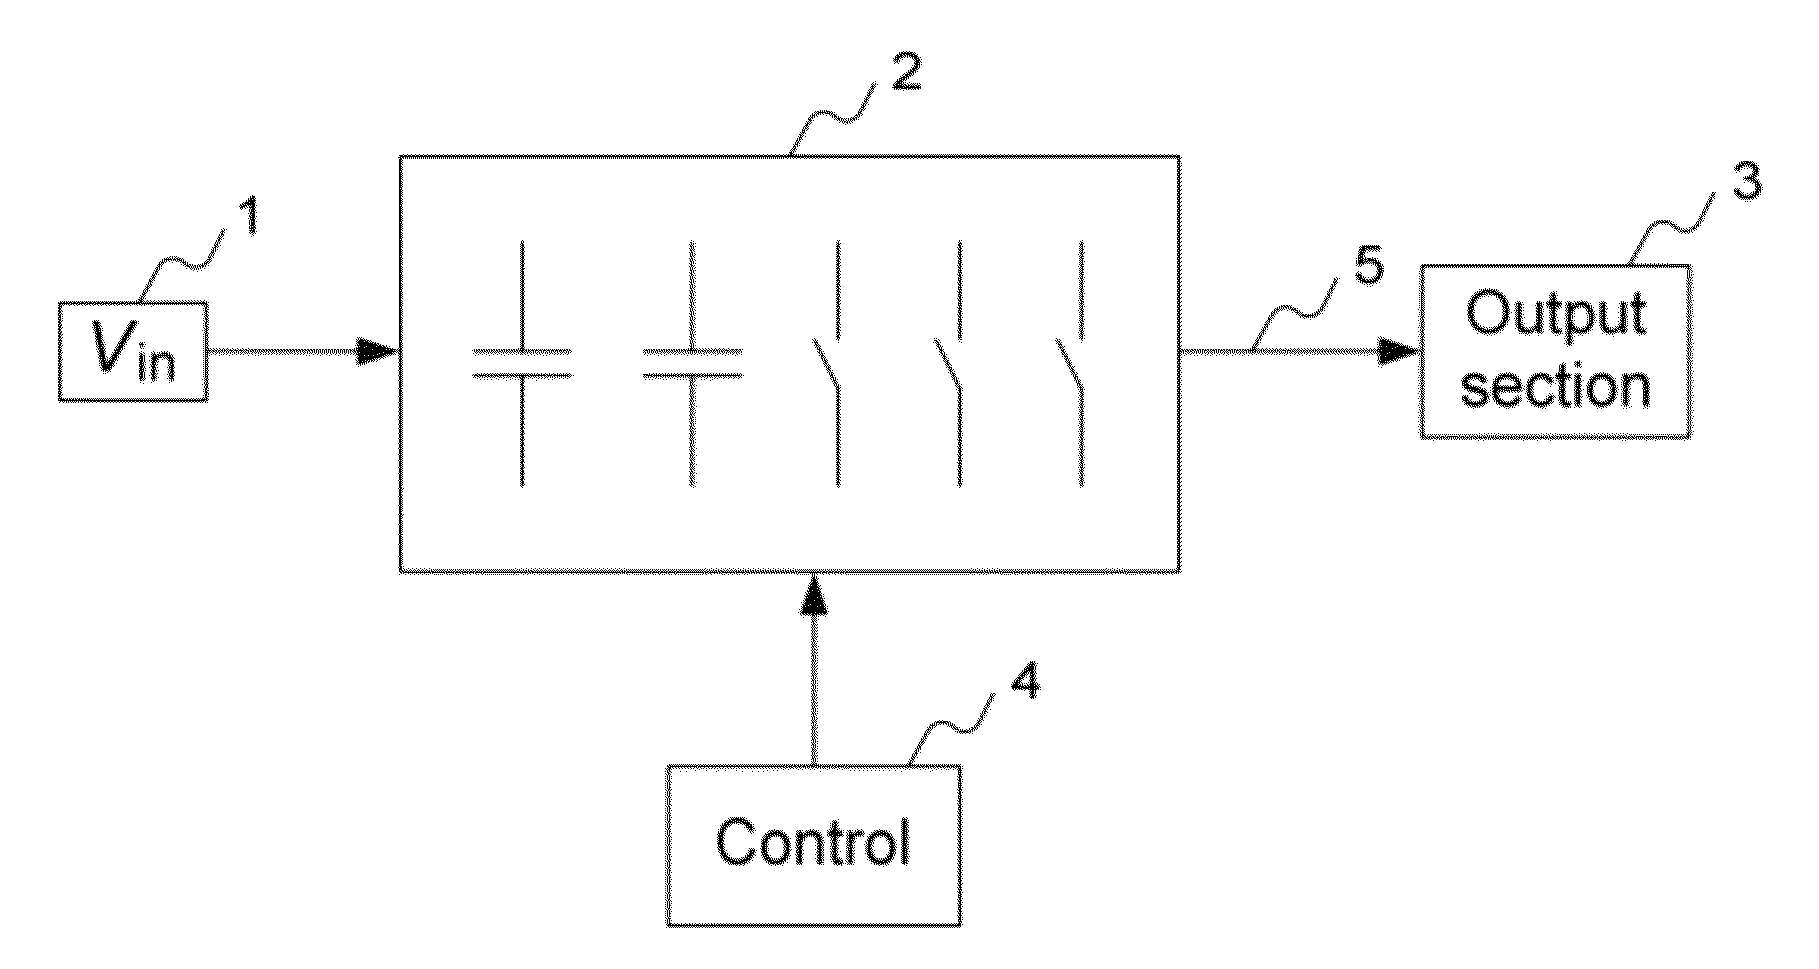 Self-adjusting switched-capacitor converter with multiple target voltages and target voltage ratios